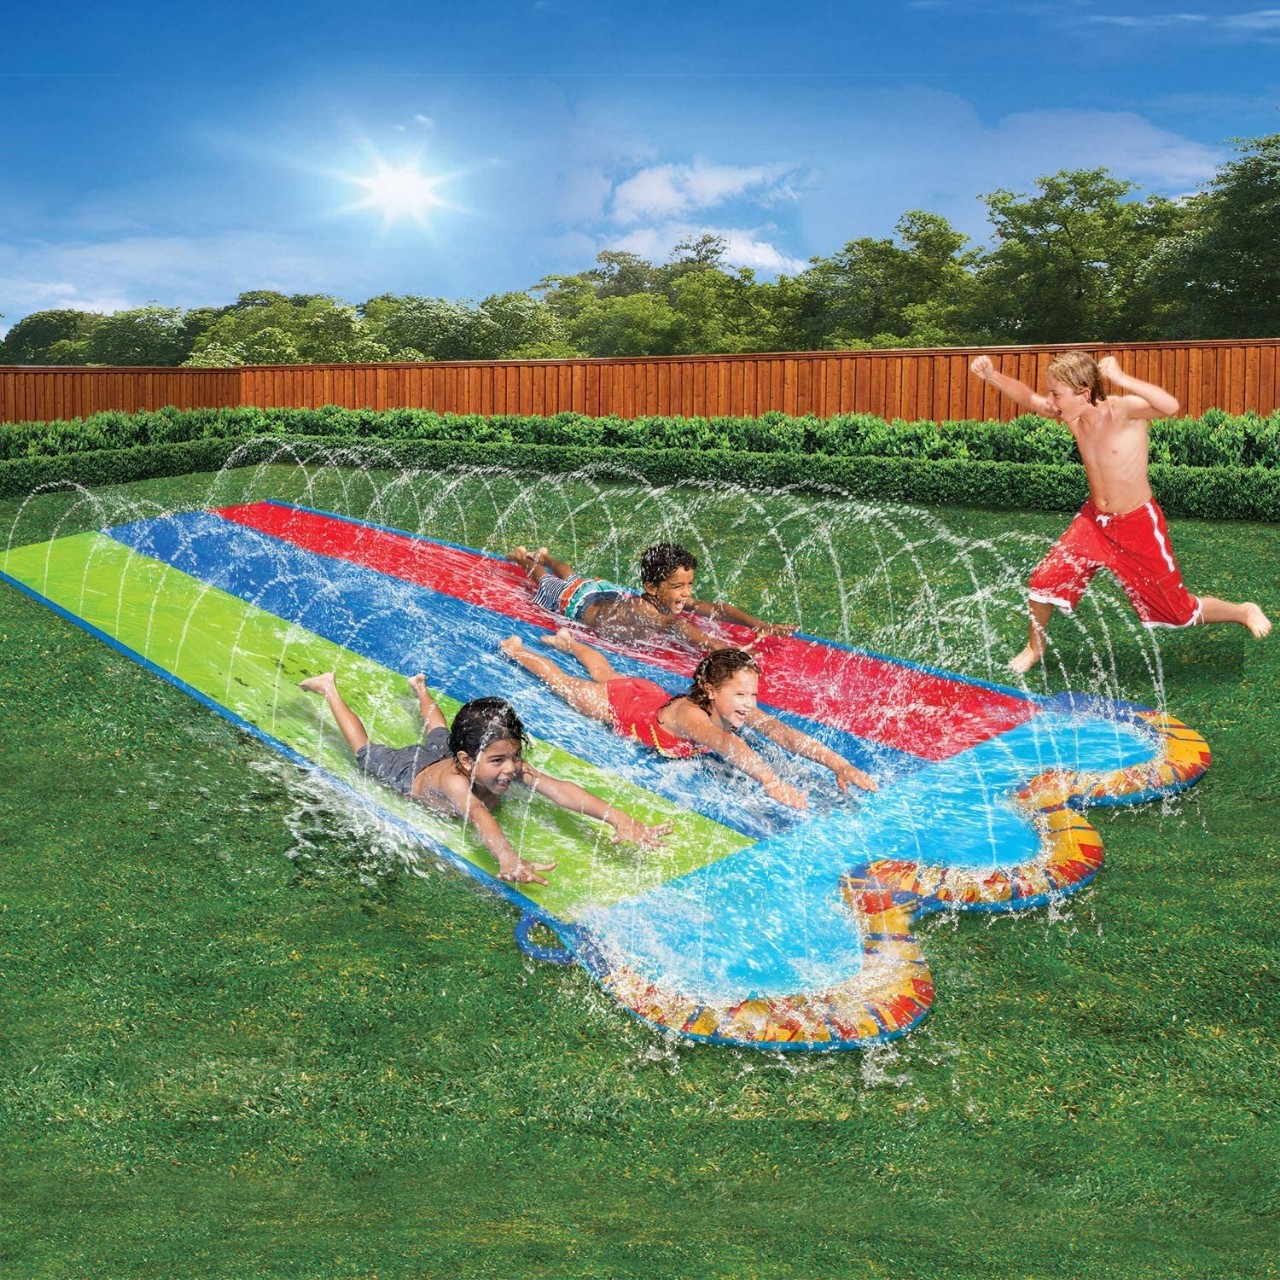 Banzai Triple Racer 16 Ft Water Slide-with 3 bodyboards included